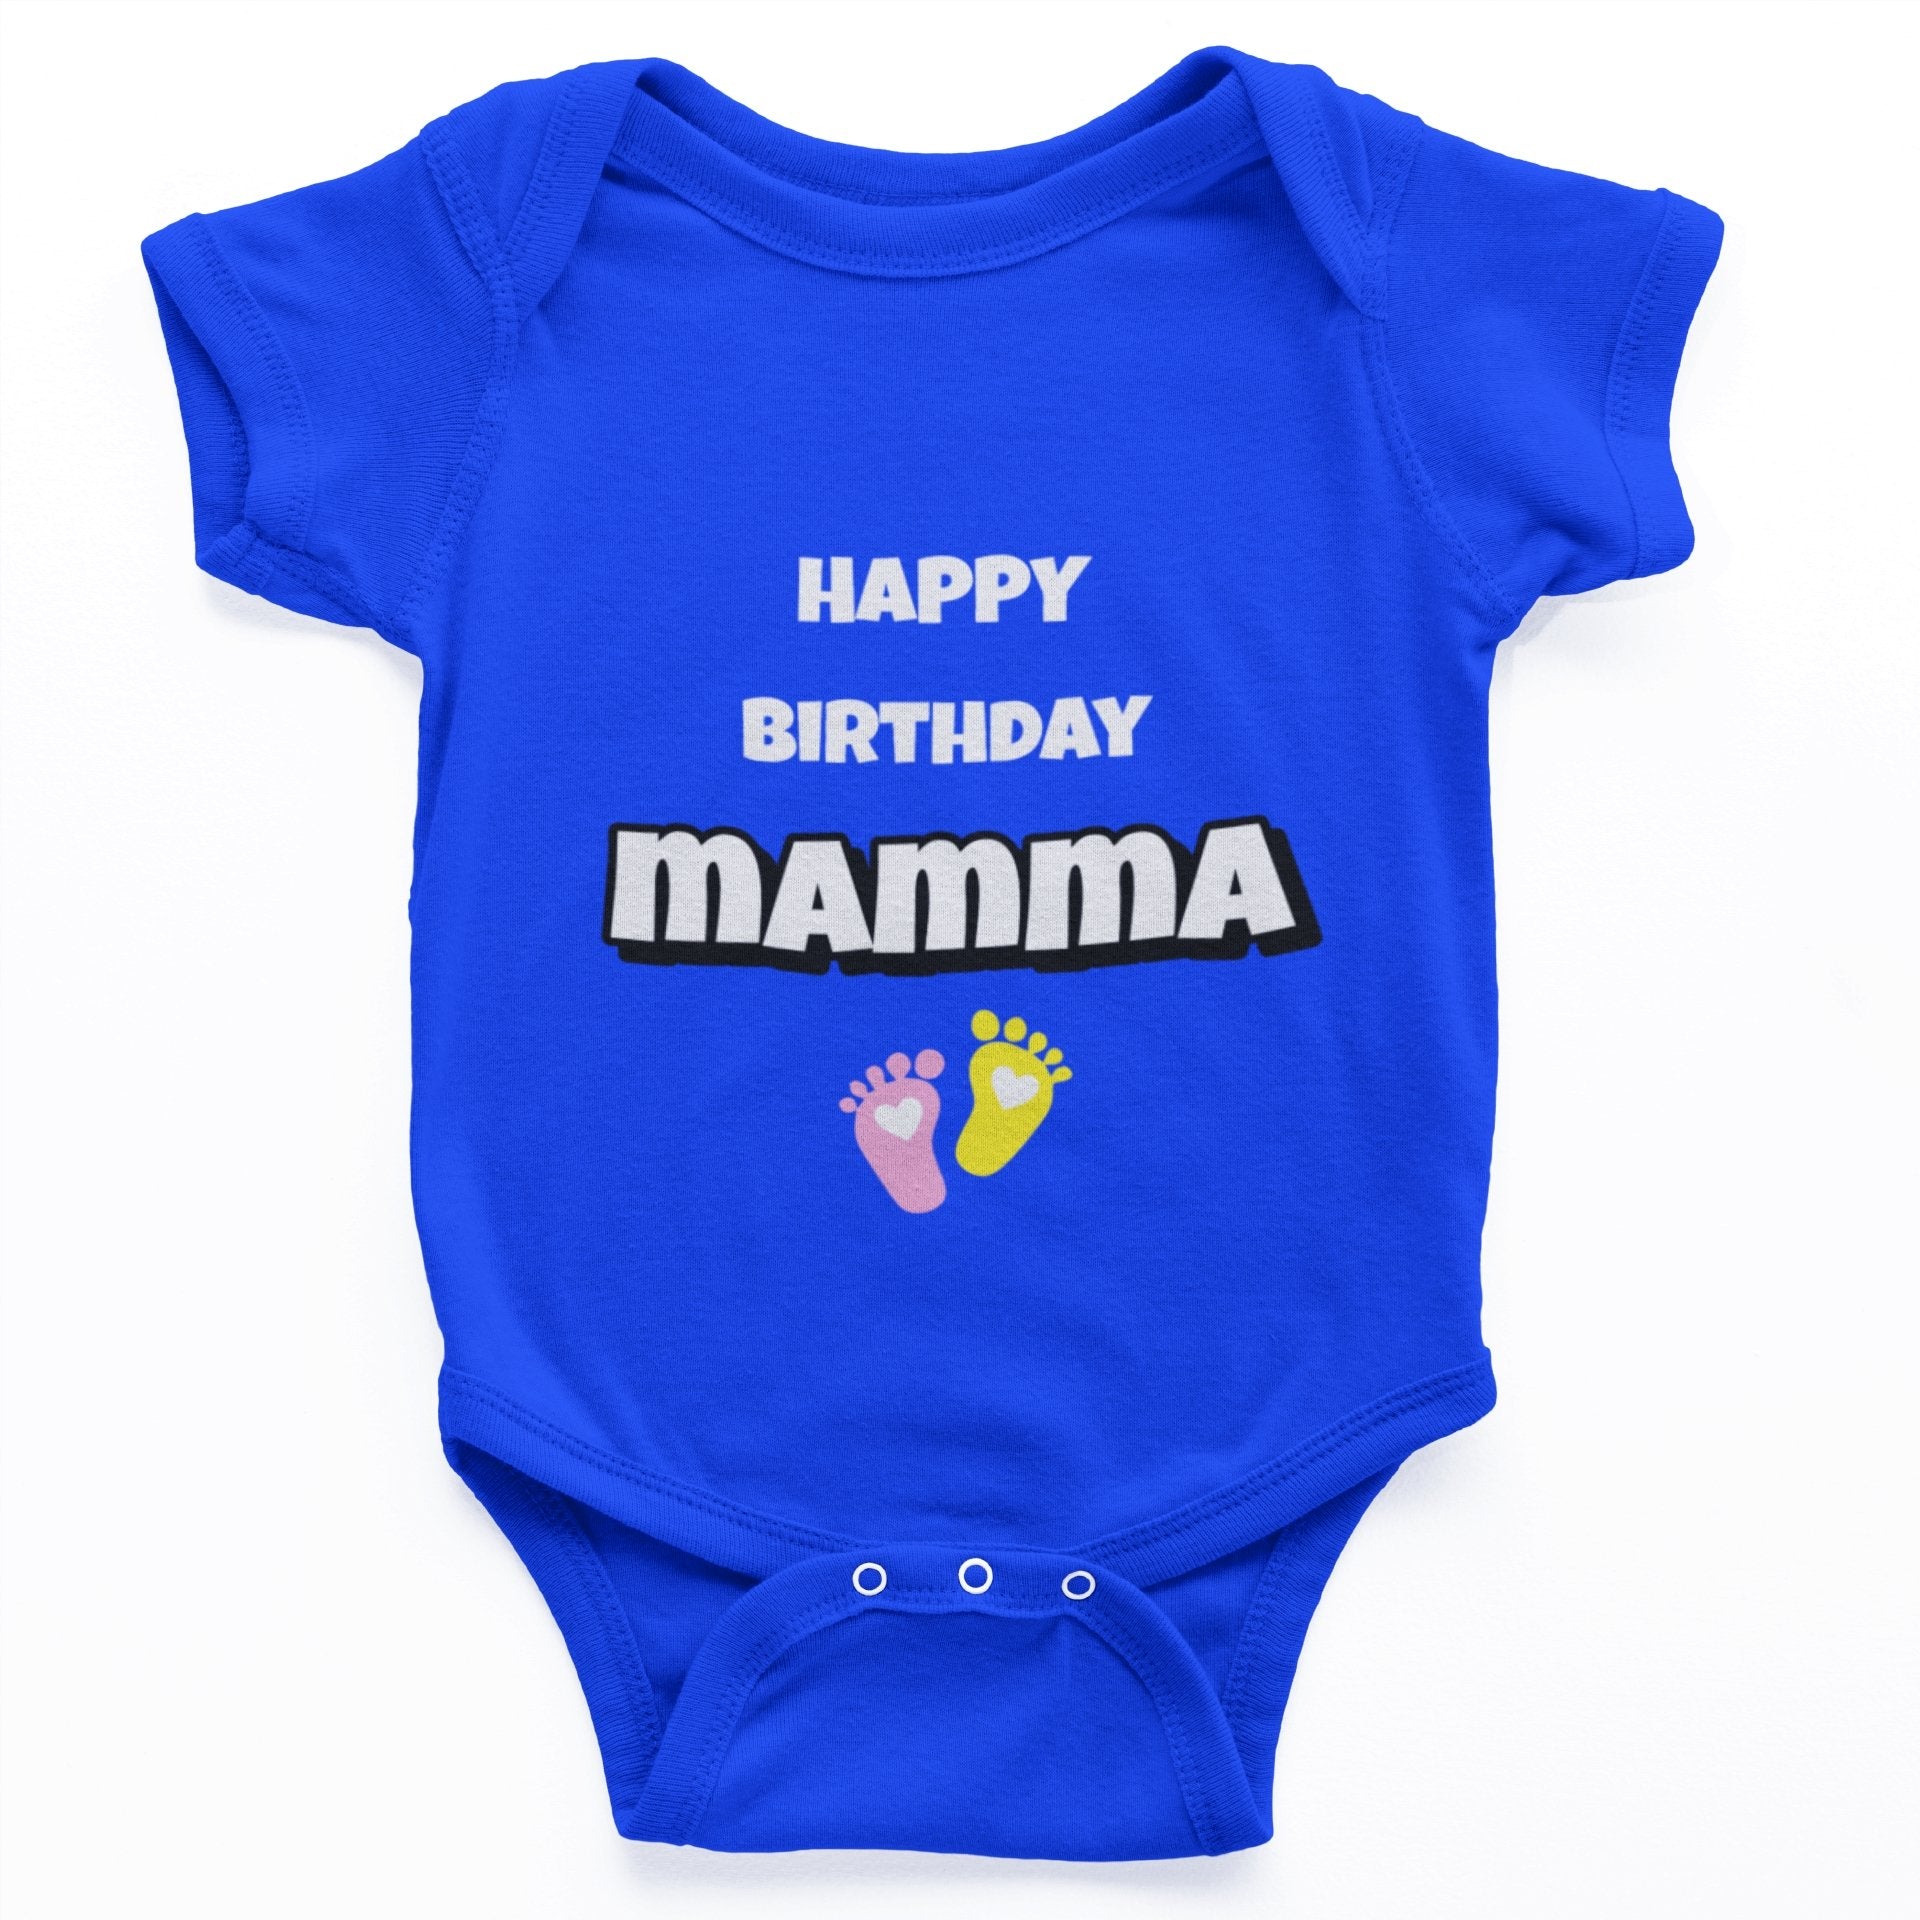 thelegalgang,Happy Birthday Onesies for Babies,.